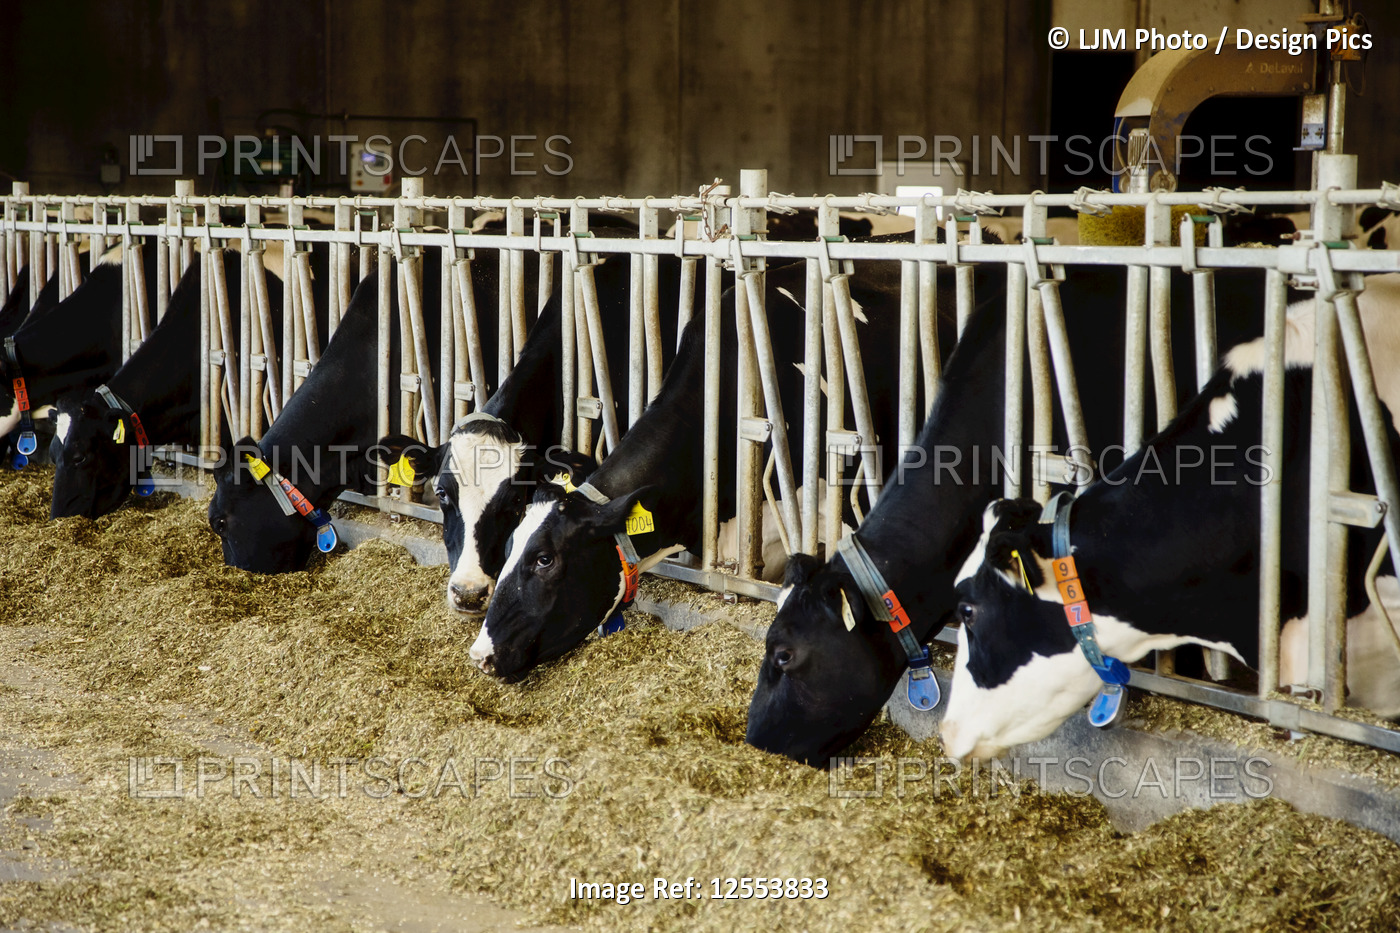 Holstein dairy cows with identification tags on their ears standing in a row ...